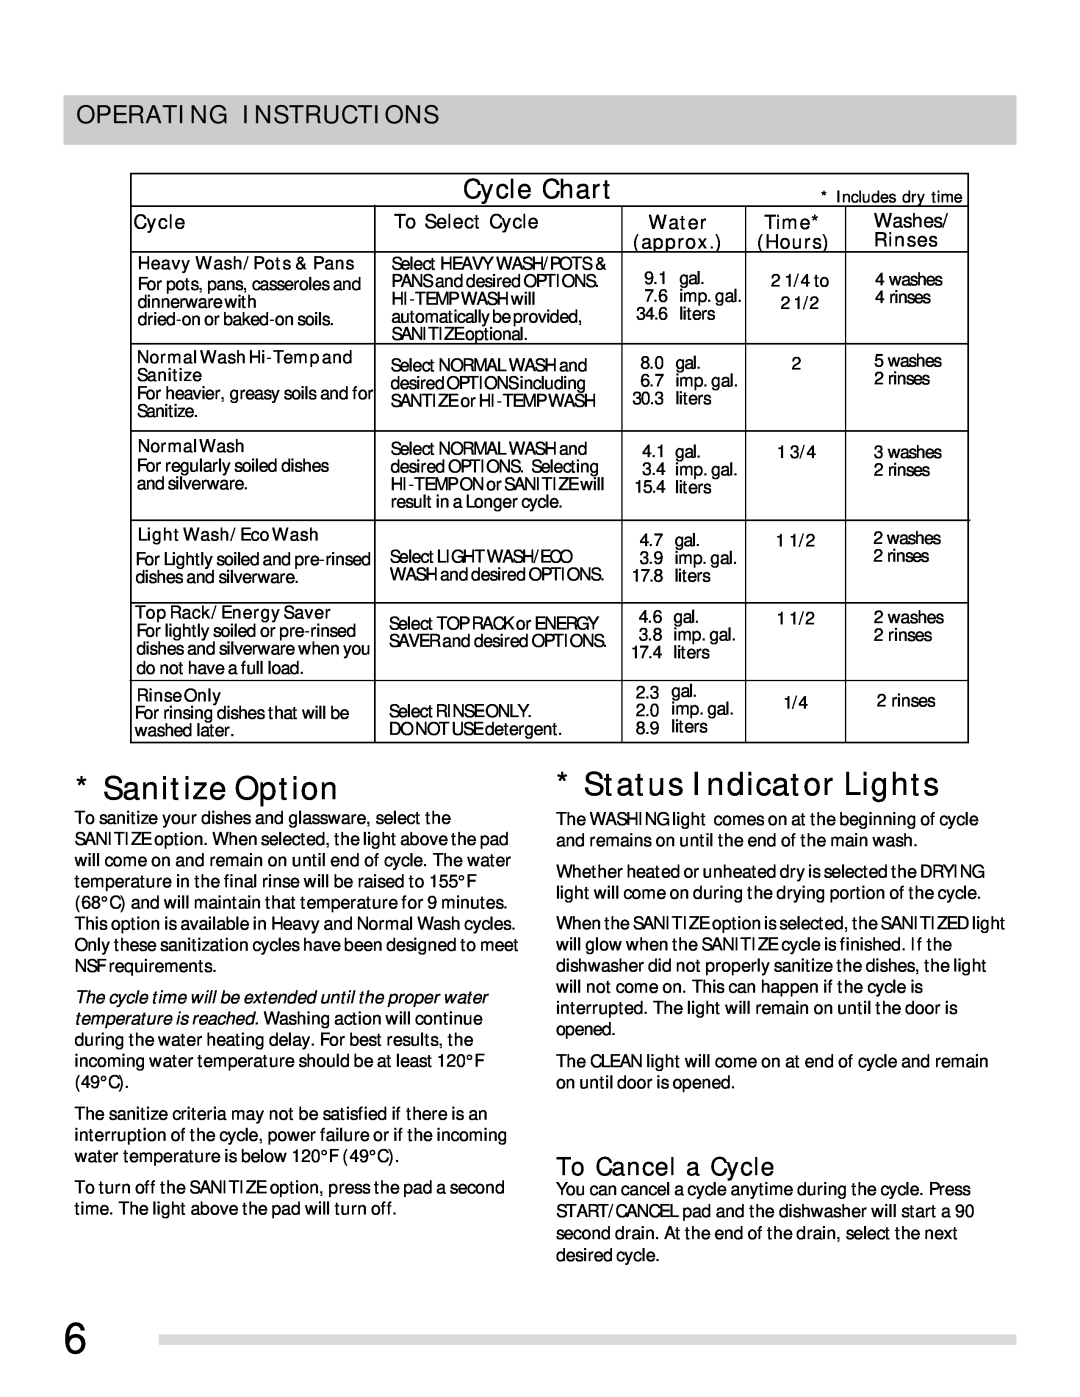 Frigidaire FFBD2411NB Sanitize Option, Status Indicator Lights, To Cancel a Cycle, Cycle Chart, Operating Instructions 